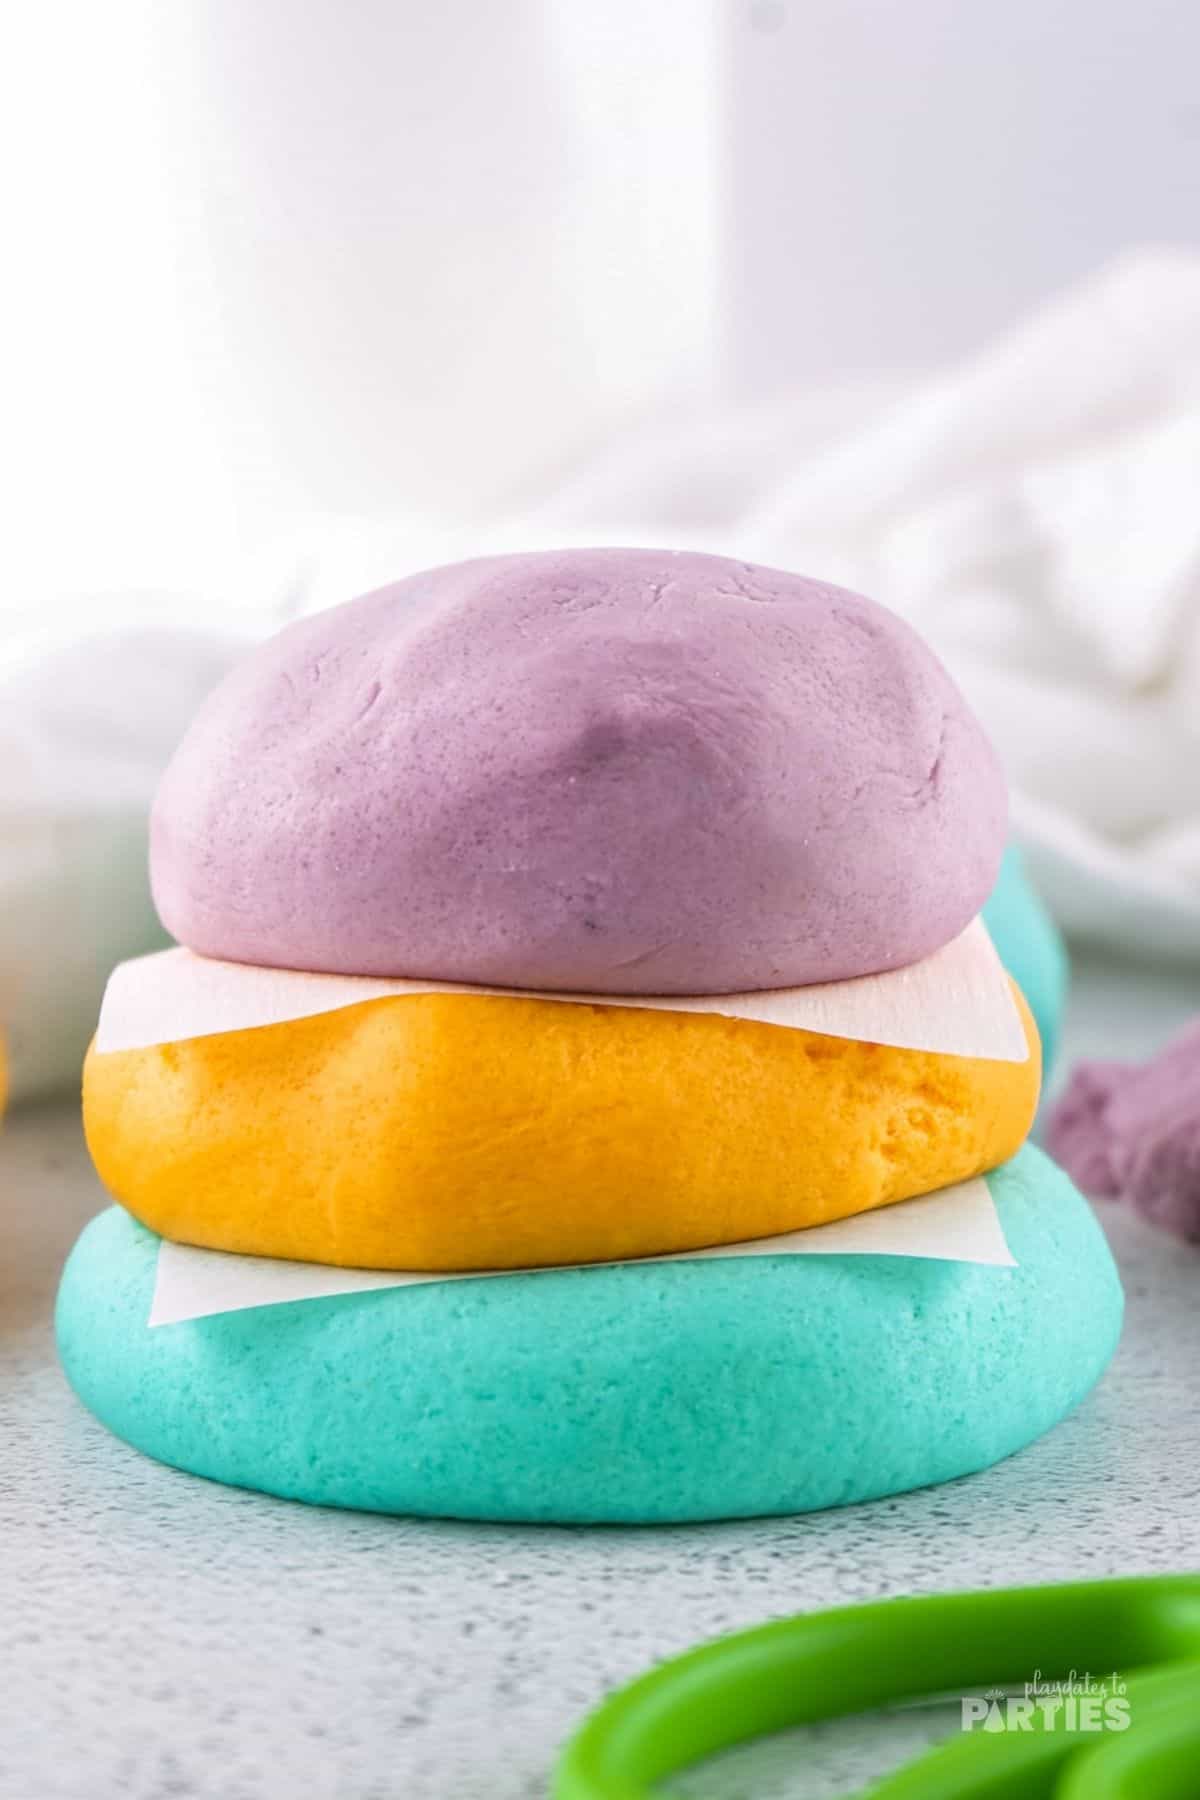 Three colors of homemade playdough stacked with parchment between each layer.